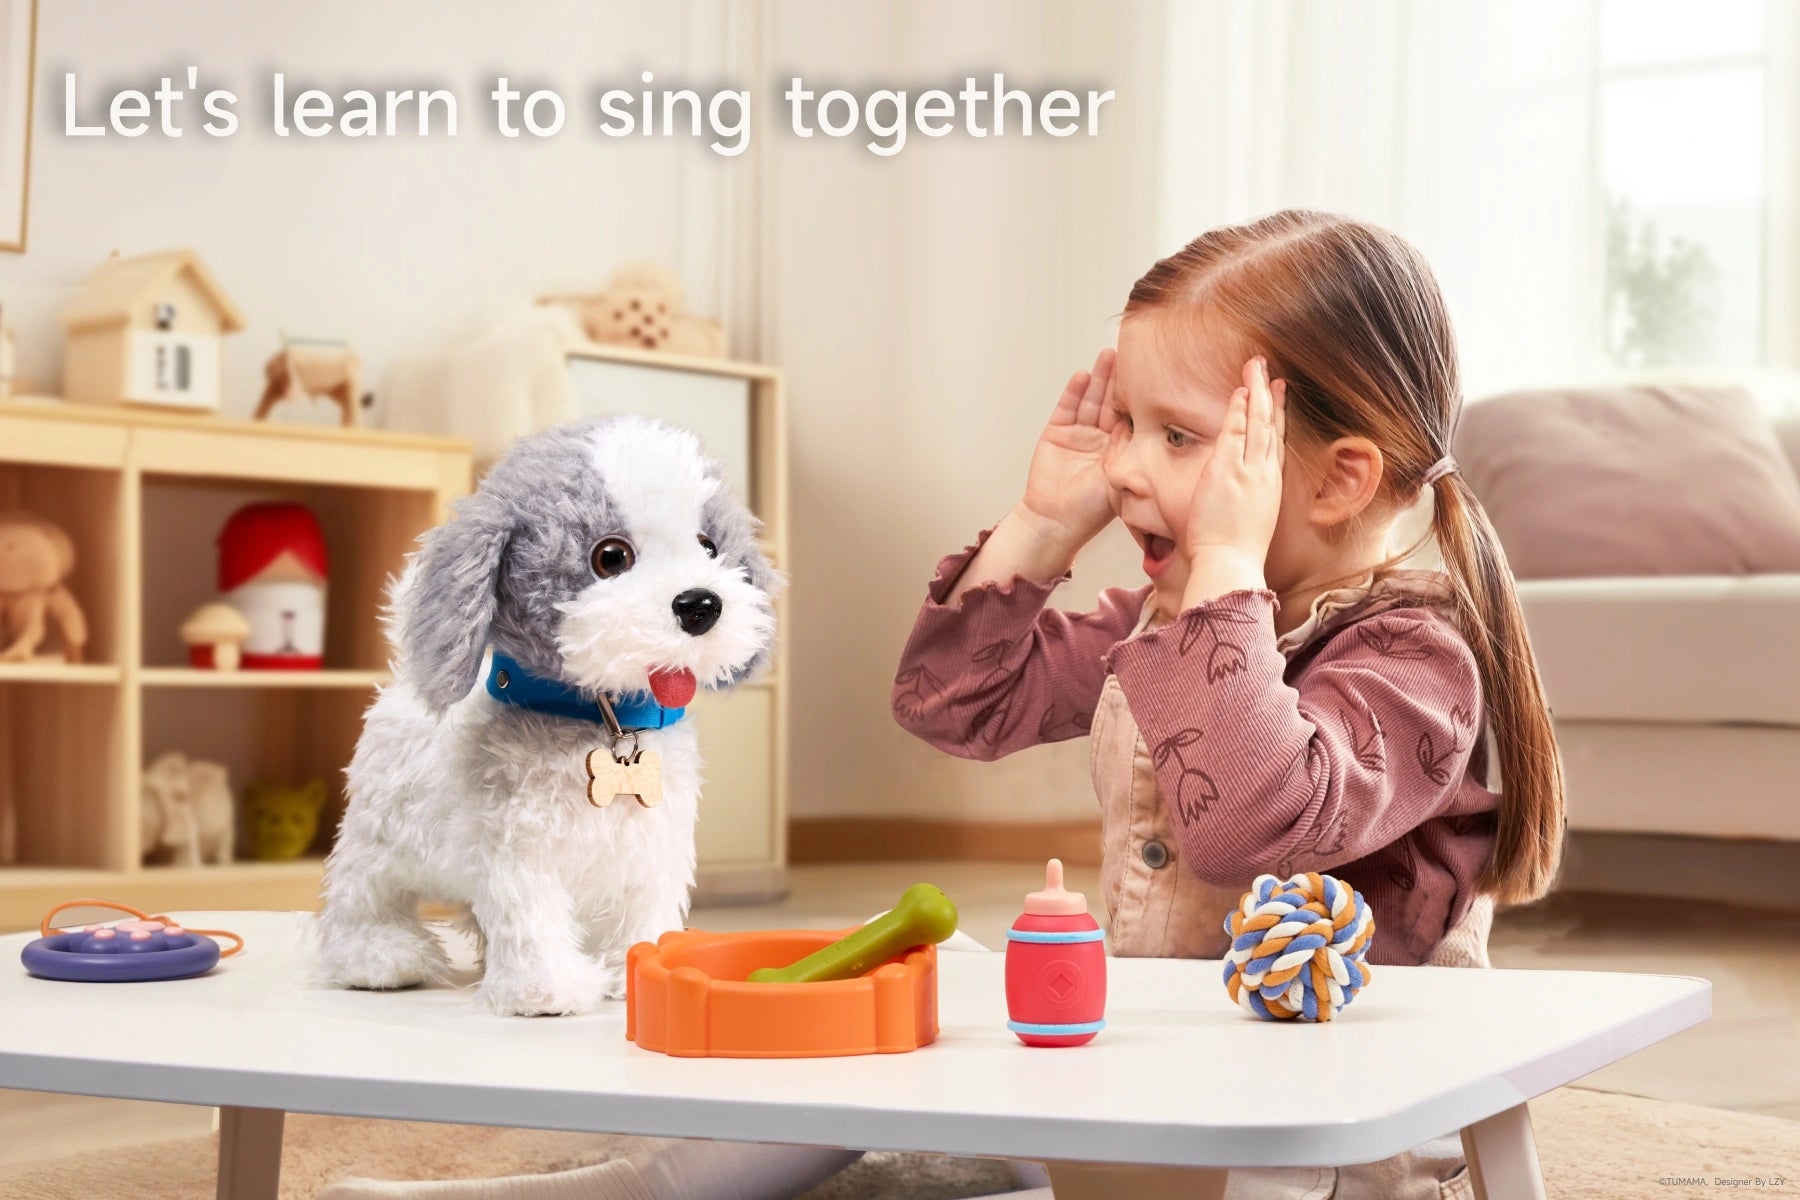 Walk bark sing lick features in realistic dog toy set